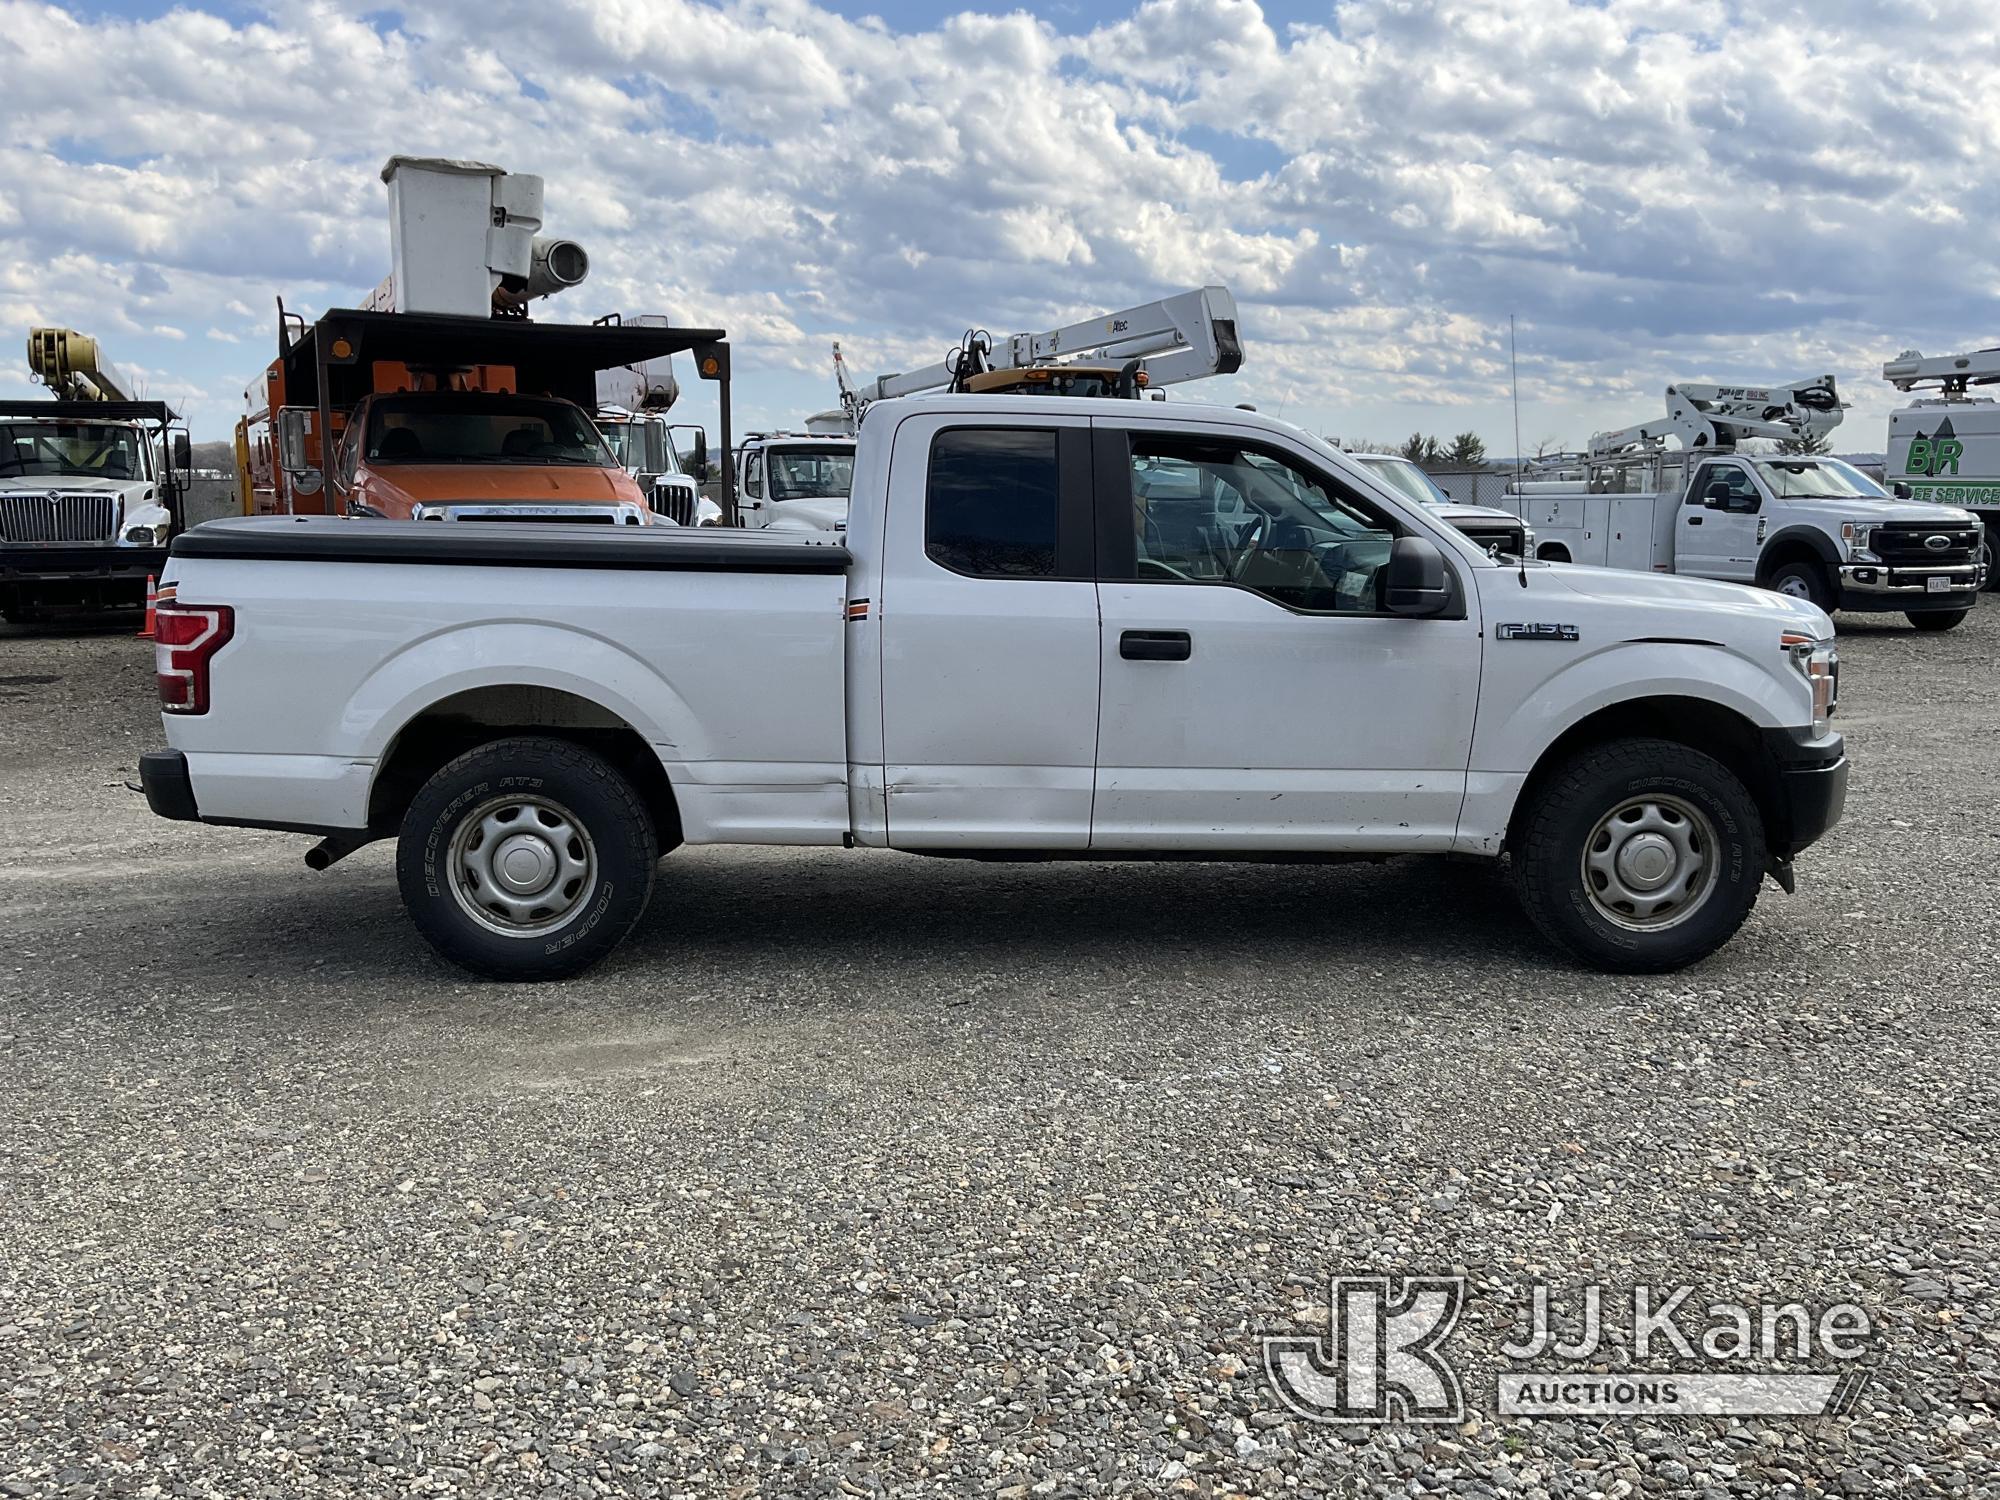 (Shrewsbury, MA) 2019 Ford F150 4x4 Extended-Cab Pickup Truck Runs & Struggles To Move When Transmis